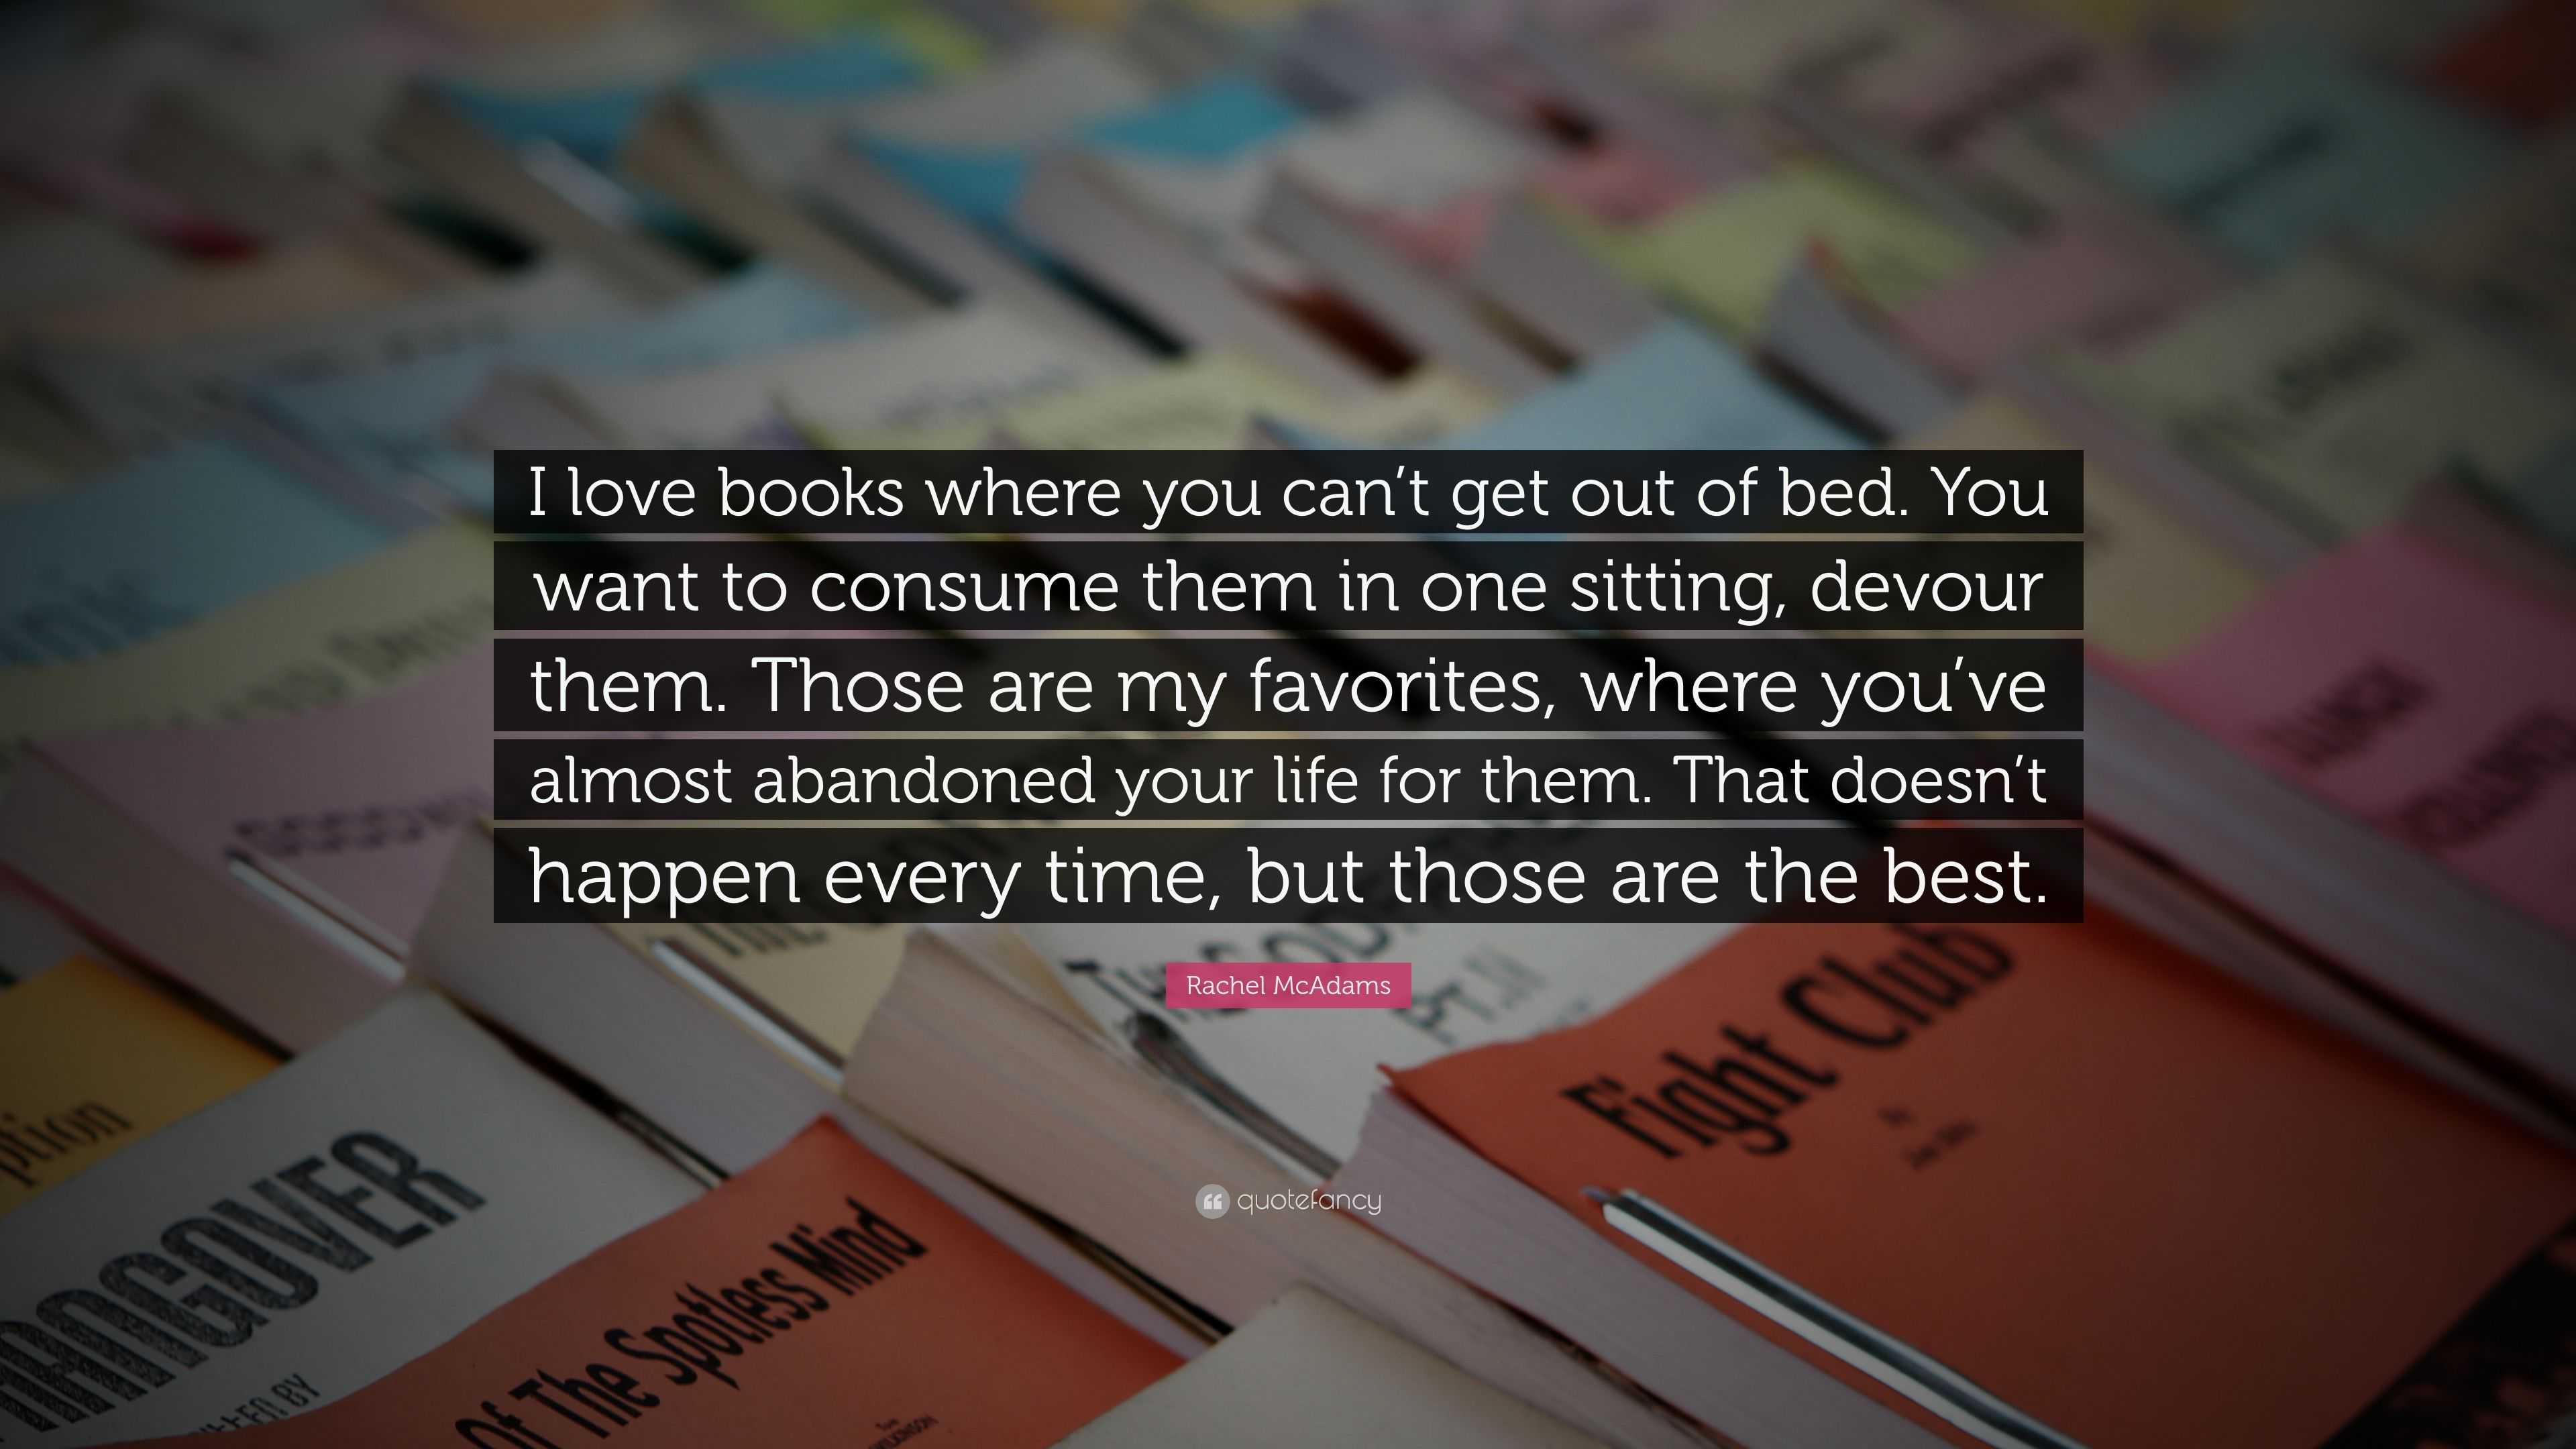 Rachel Mcadams Quote I Love Books Where You Can T Get Out Of Bed You Want To Consume Them In One Sitting Devour Them Those Are My Favorite